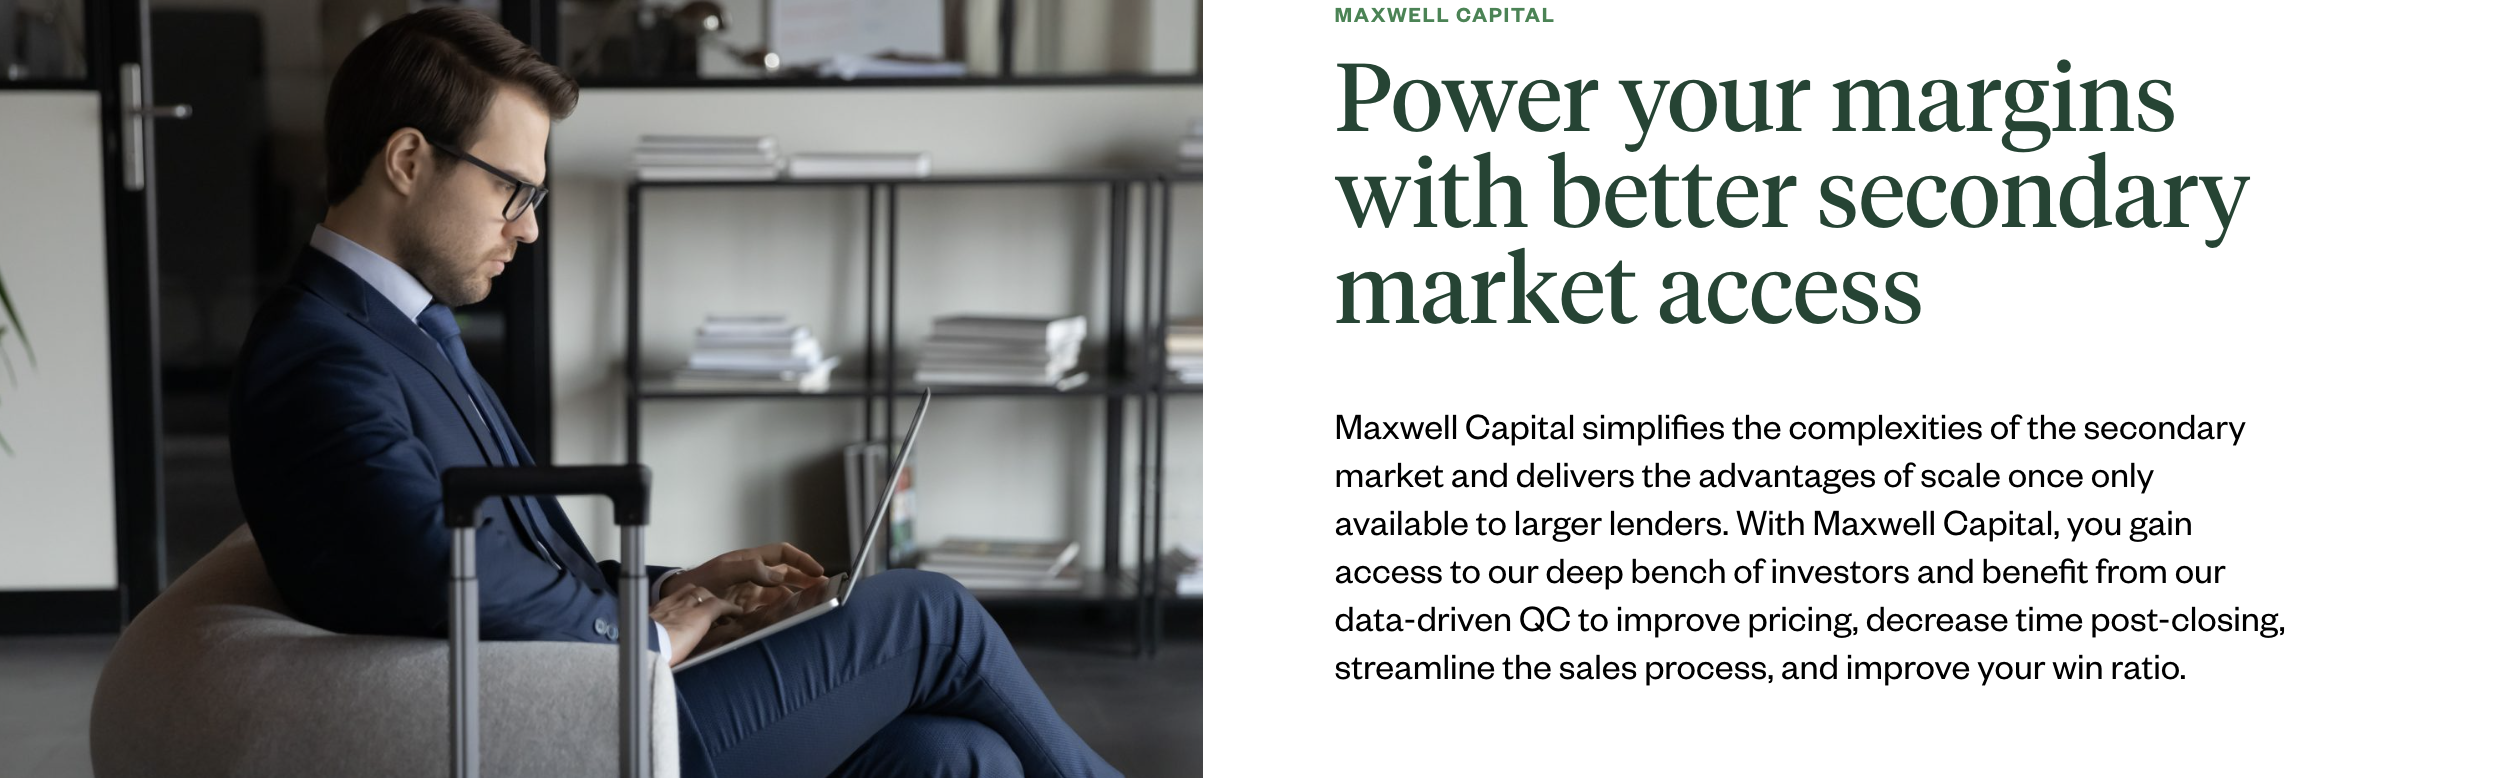 Maxwell Financial Labs product / service